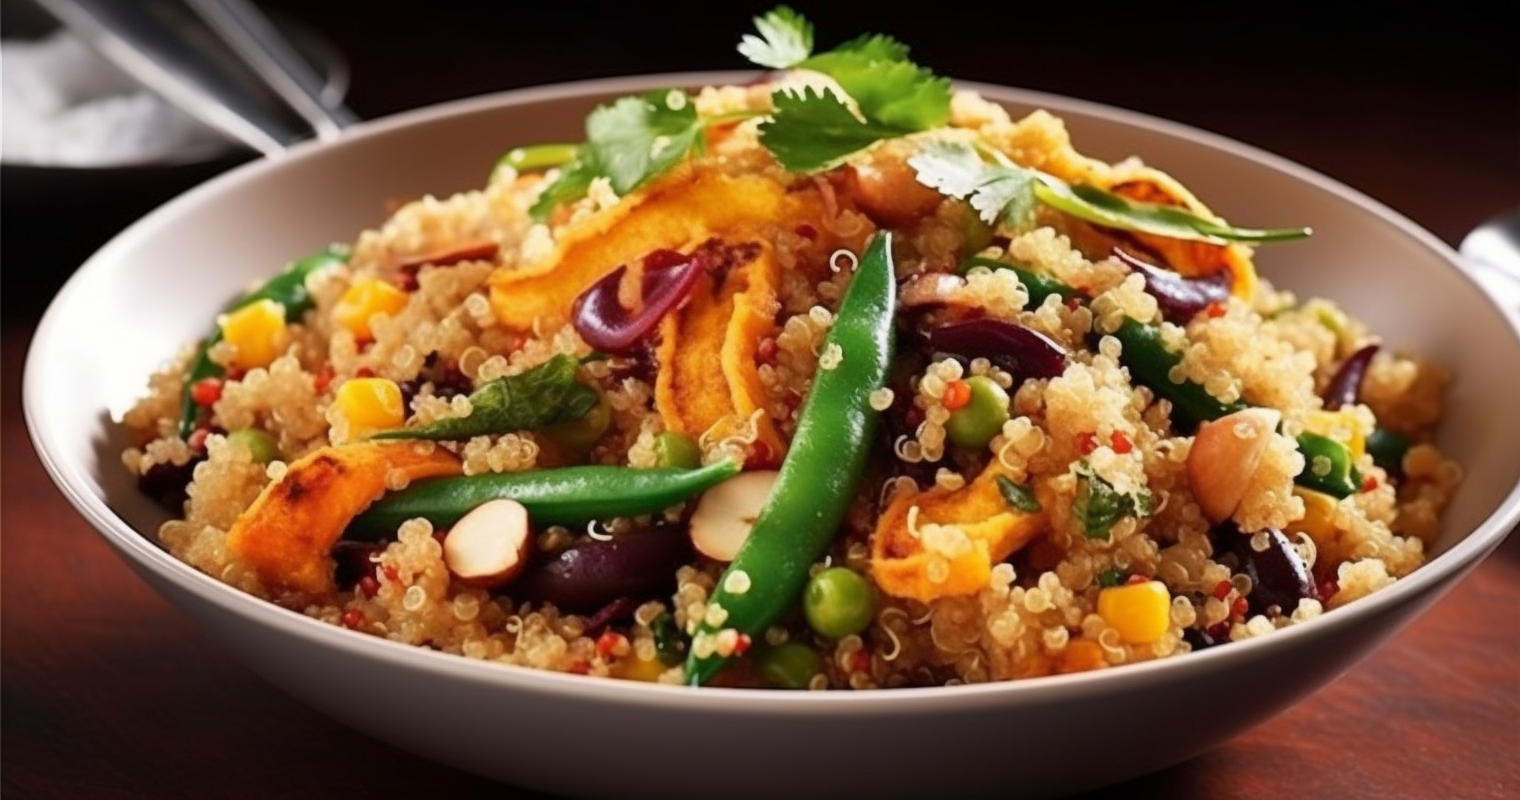 A Delicious and Healthy Quinoa and Vegetable Stir-Fry Recipe